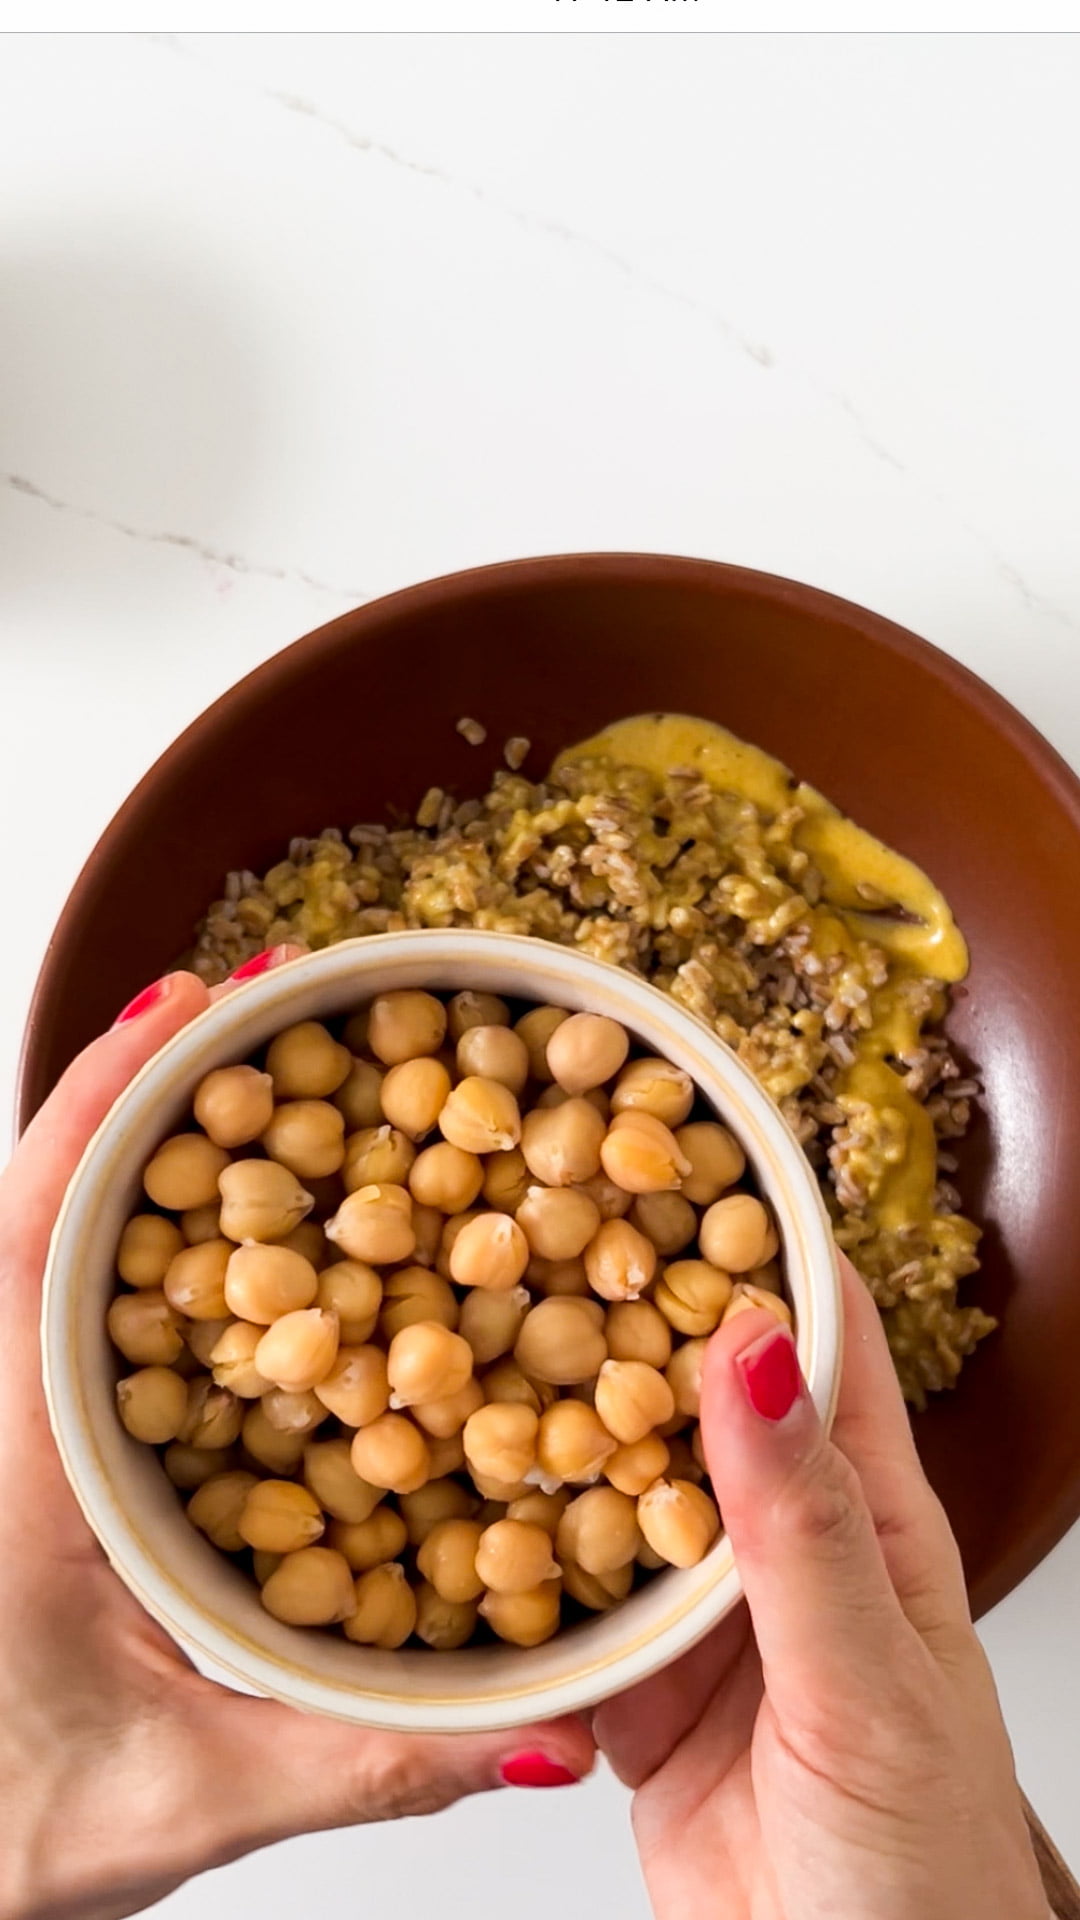 adding canned chickpeas to the curried chickpea salad salad